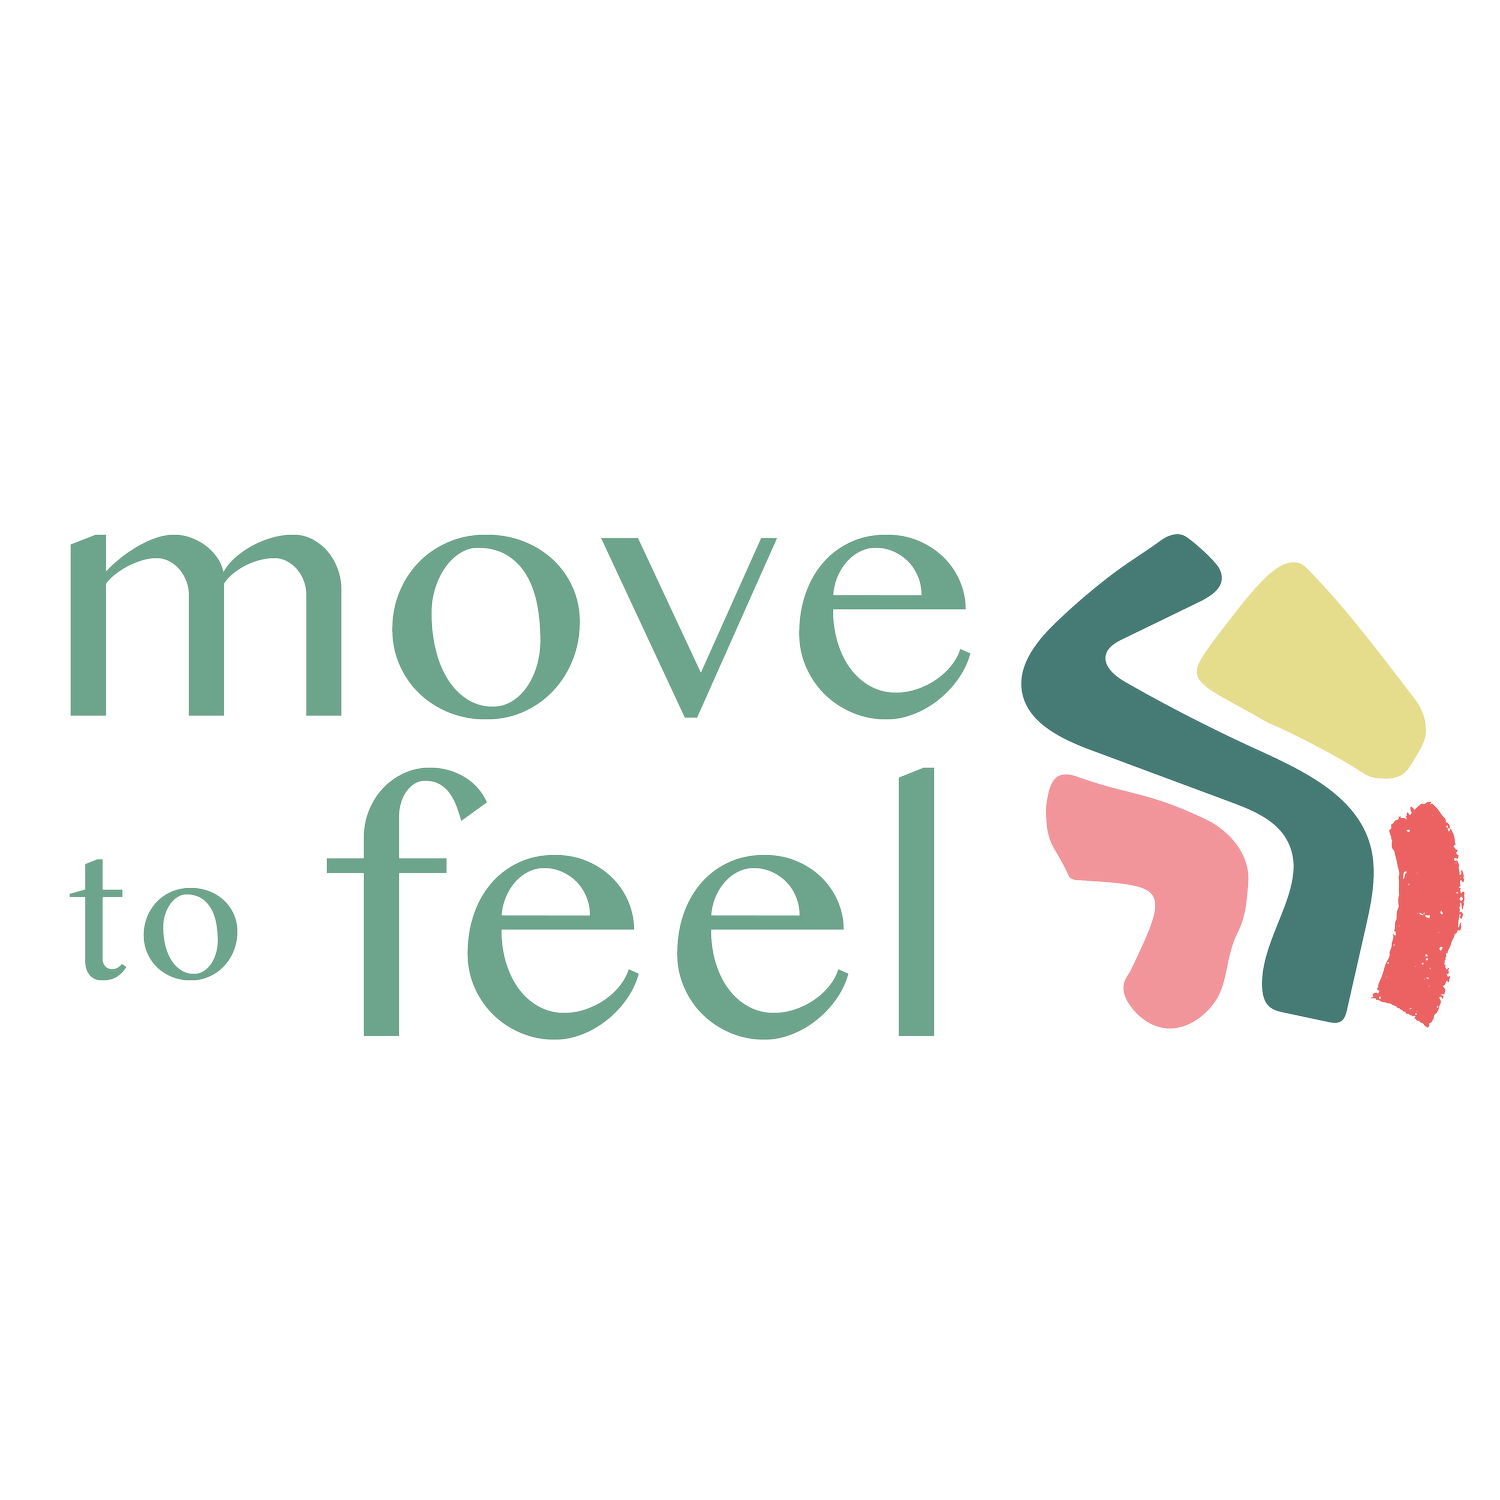 move to feel